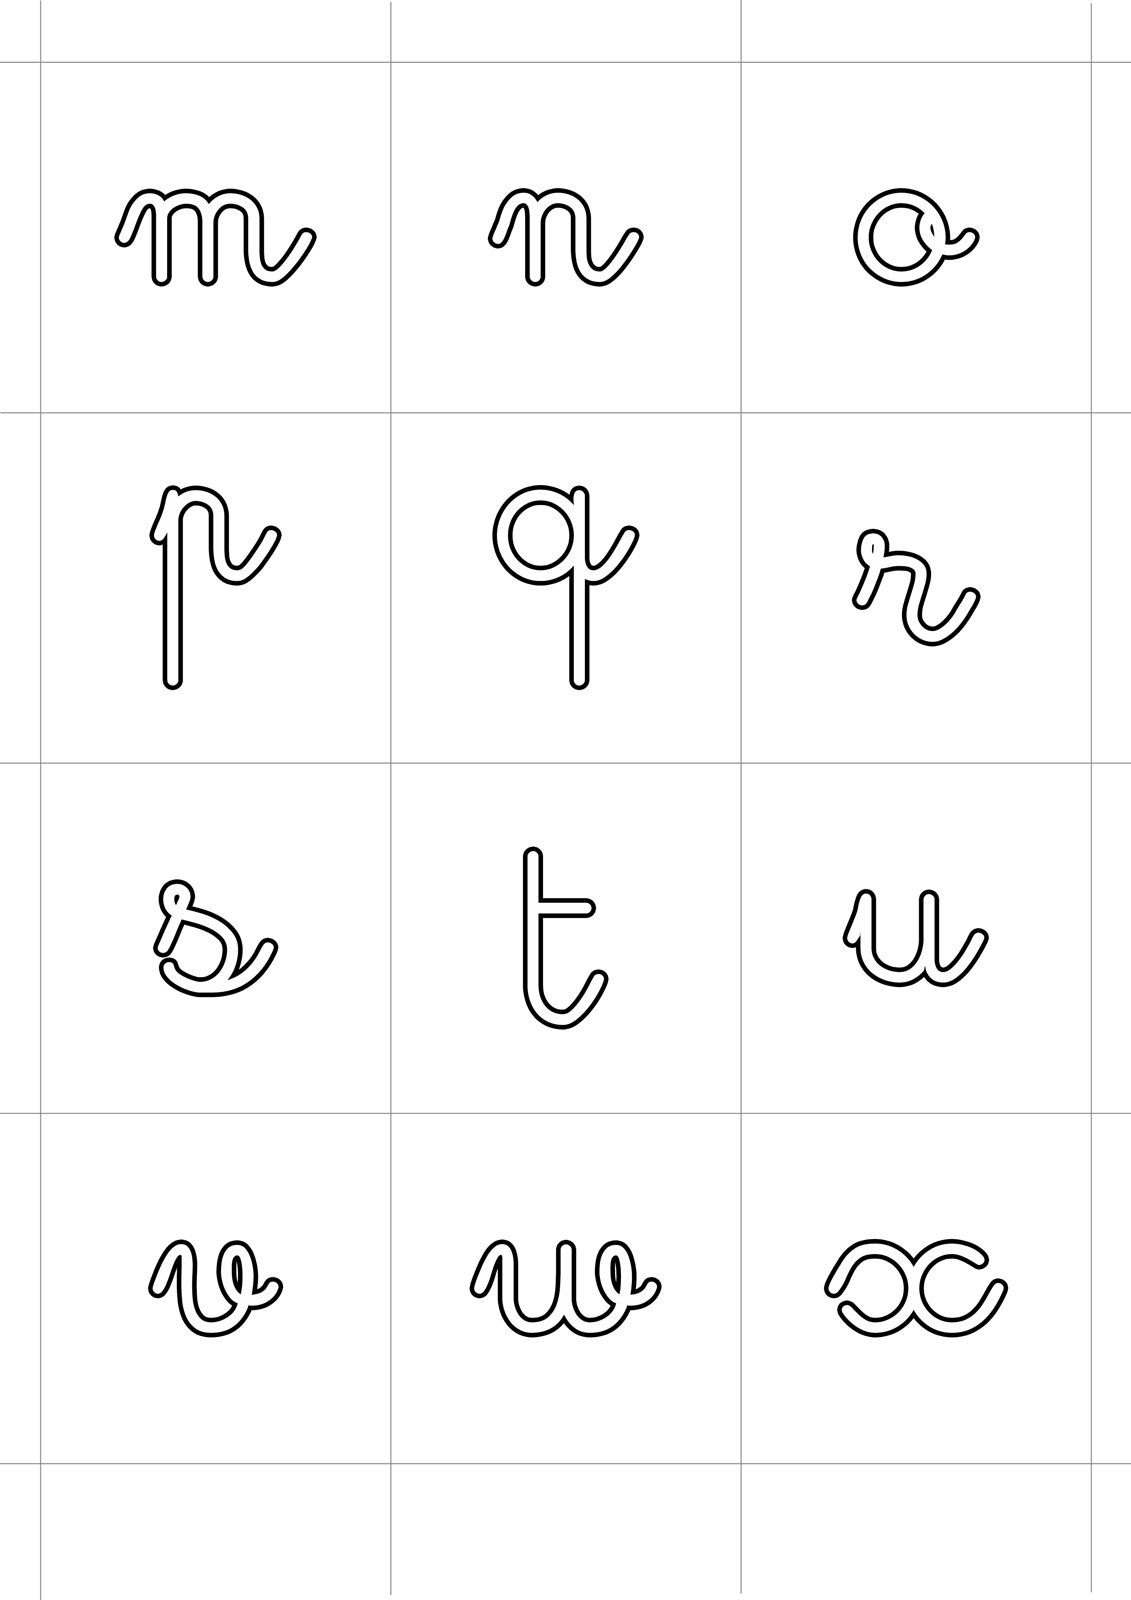 Letters and numbers - Cursive lowercase letters from m to x